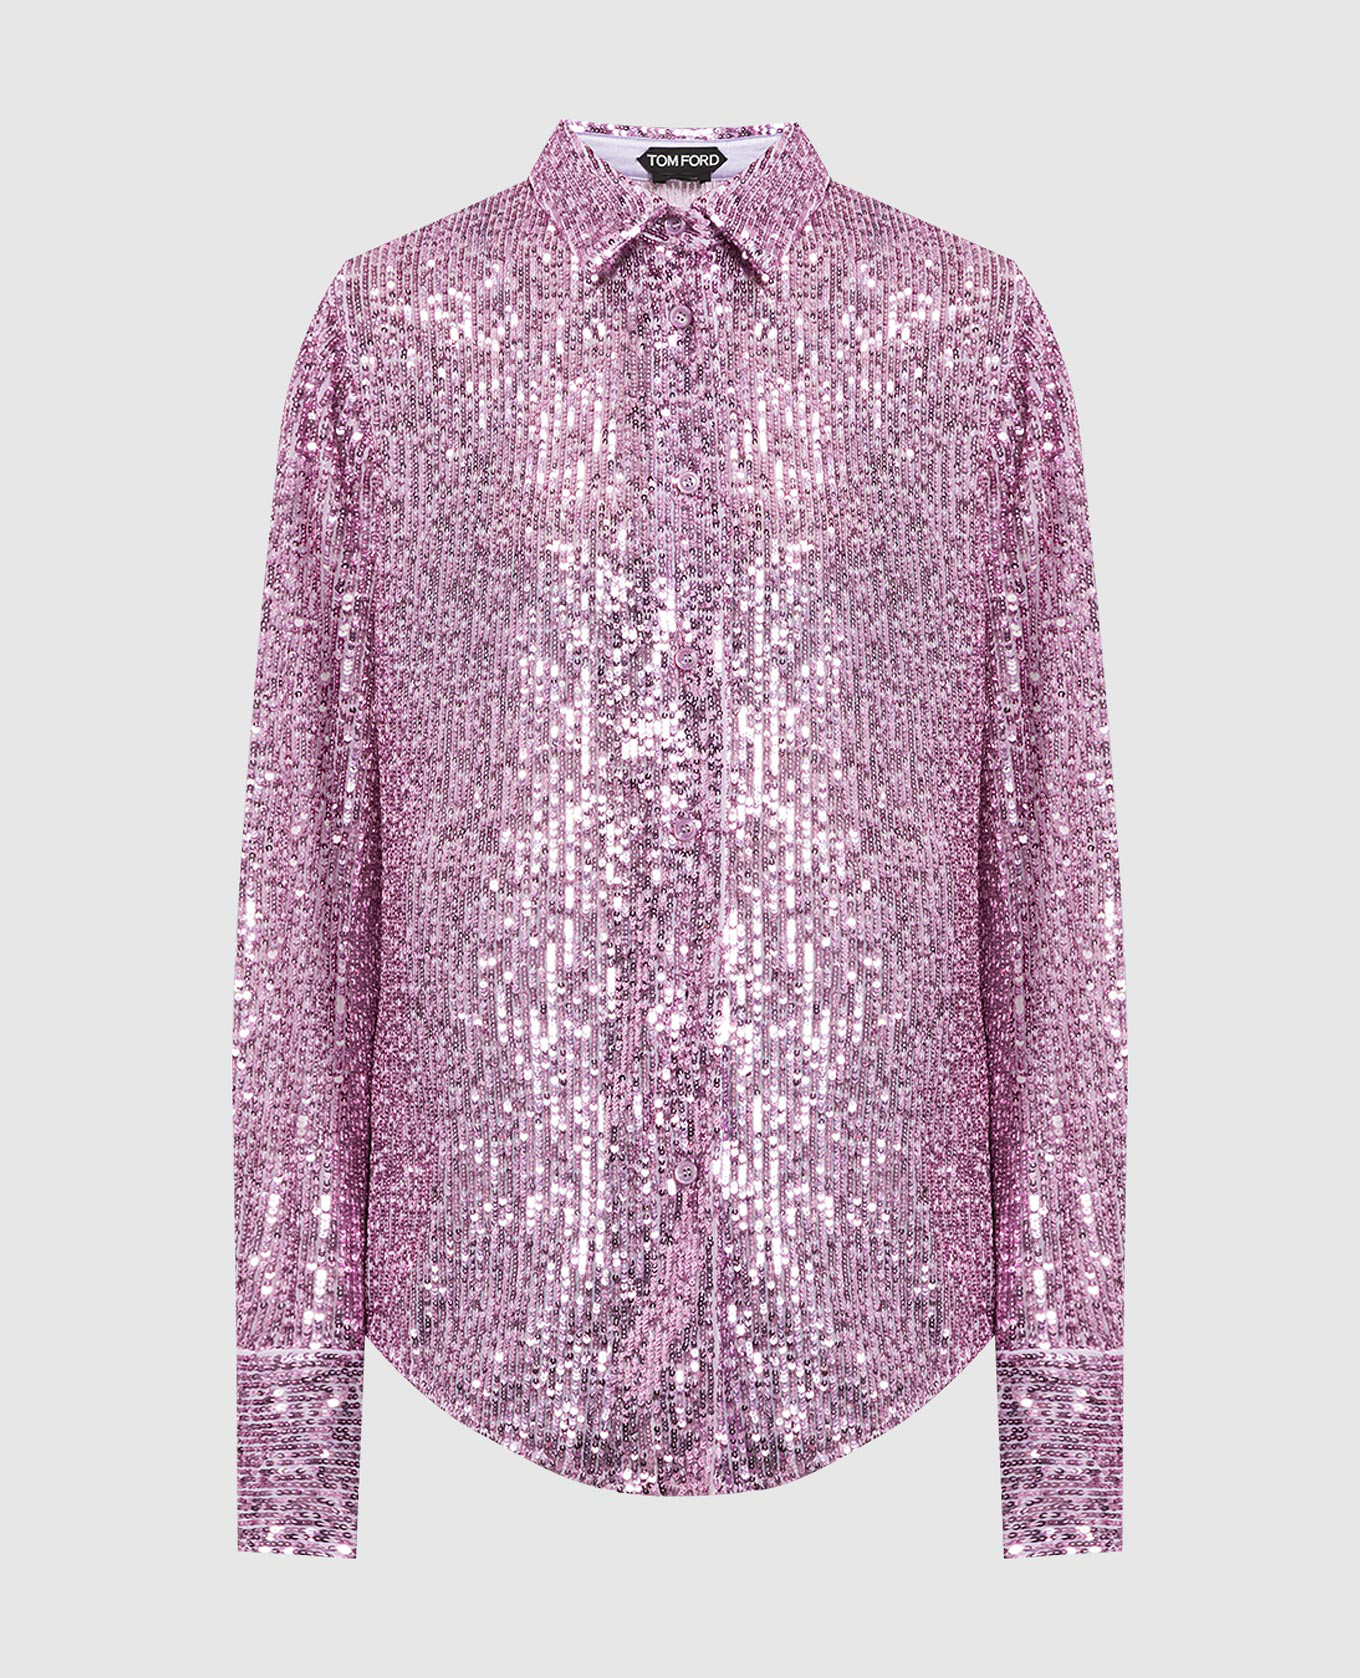 Purple shirt with sequins